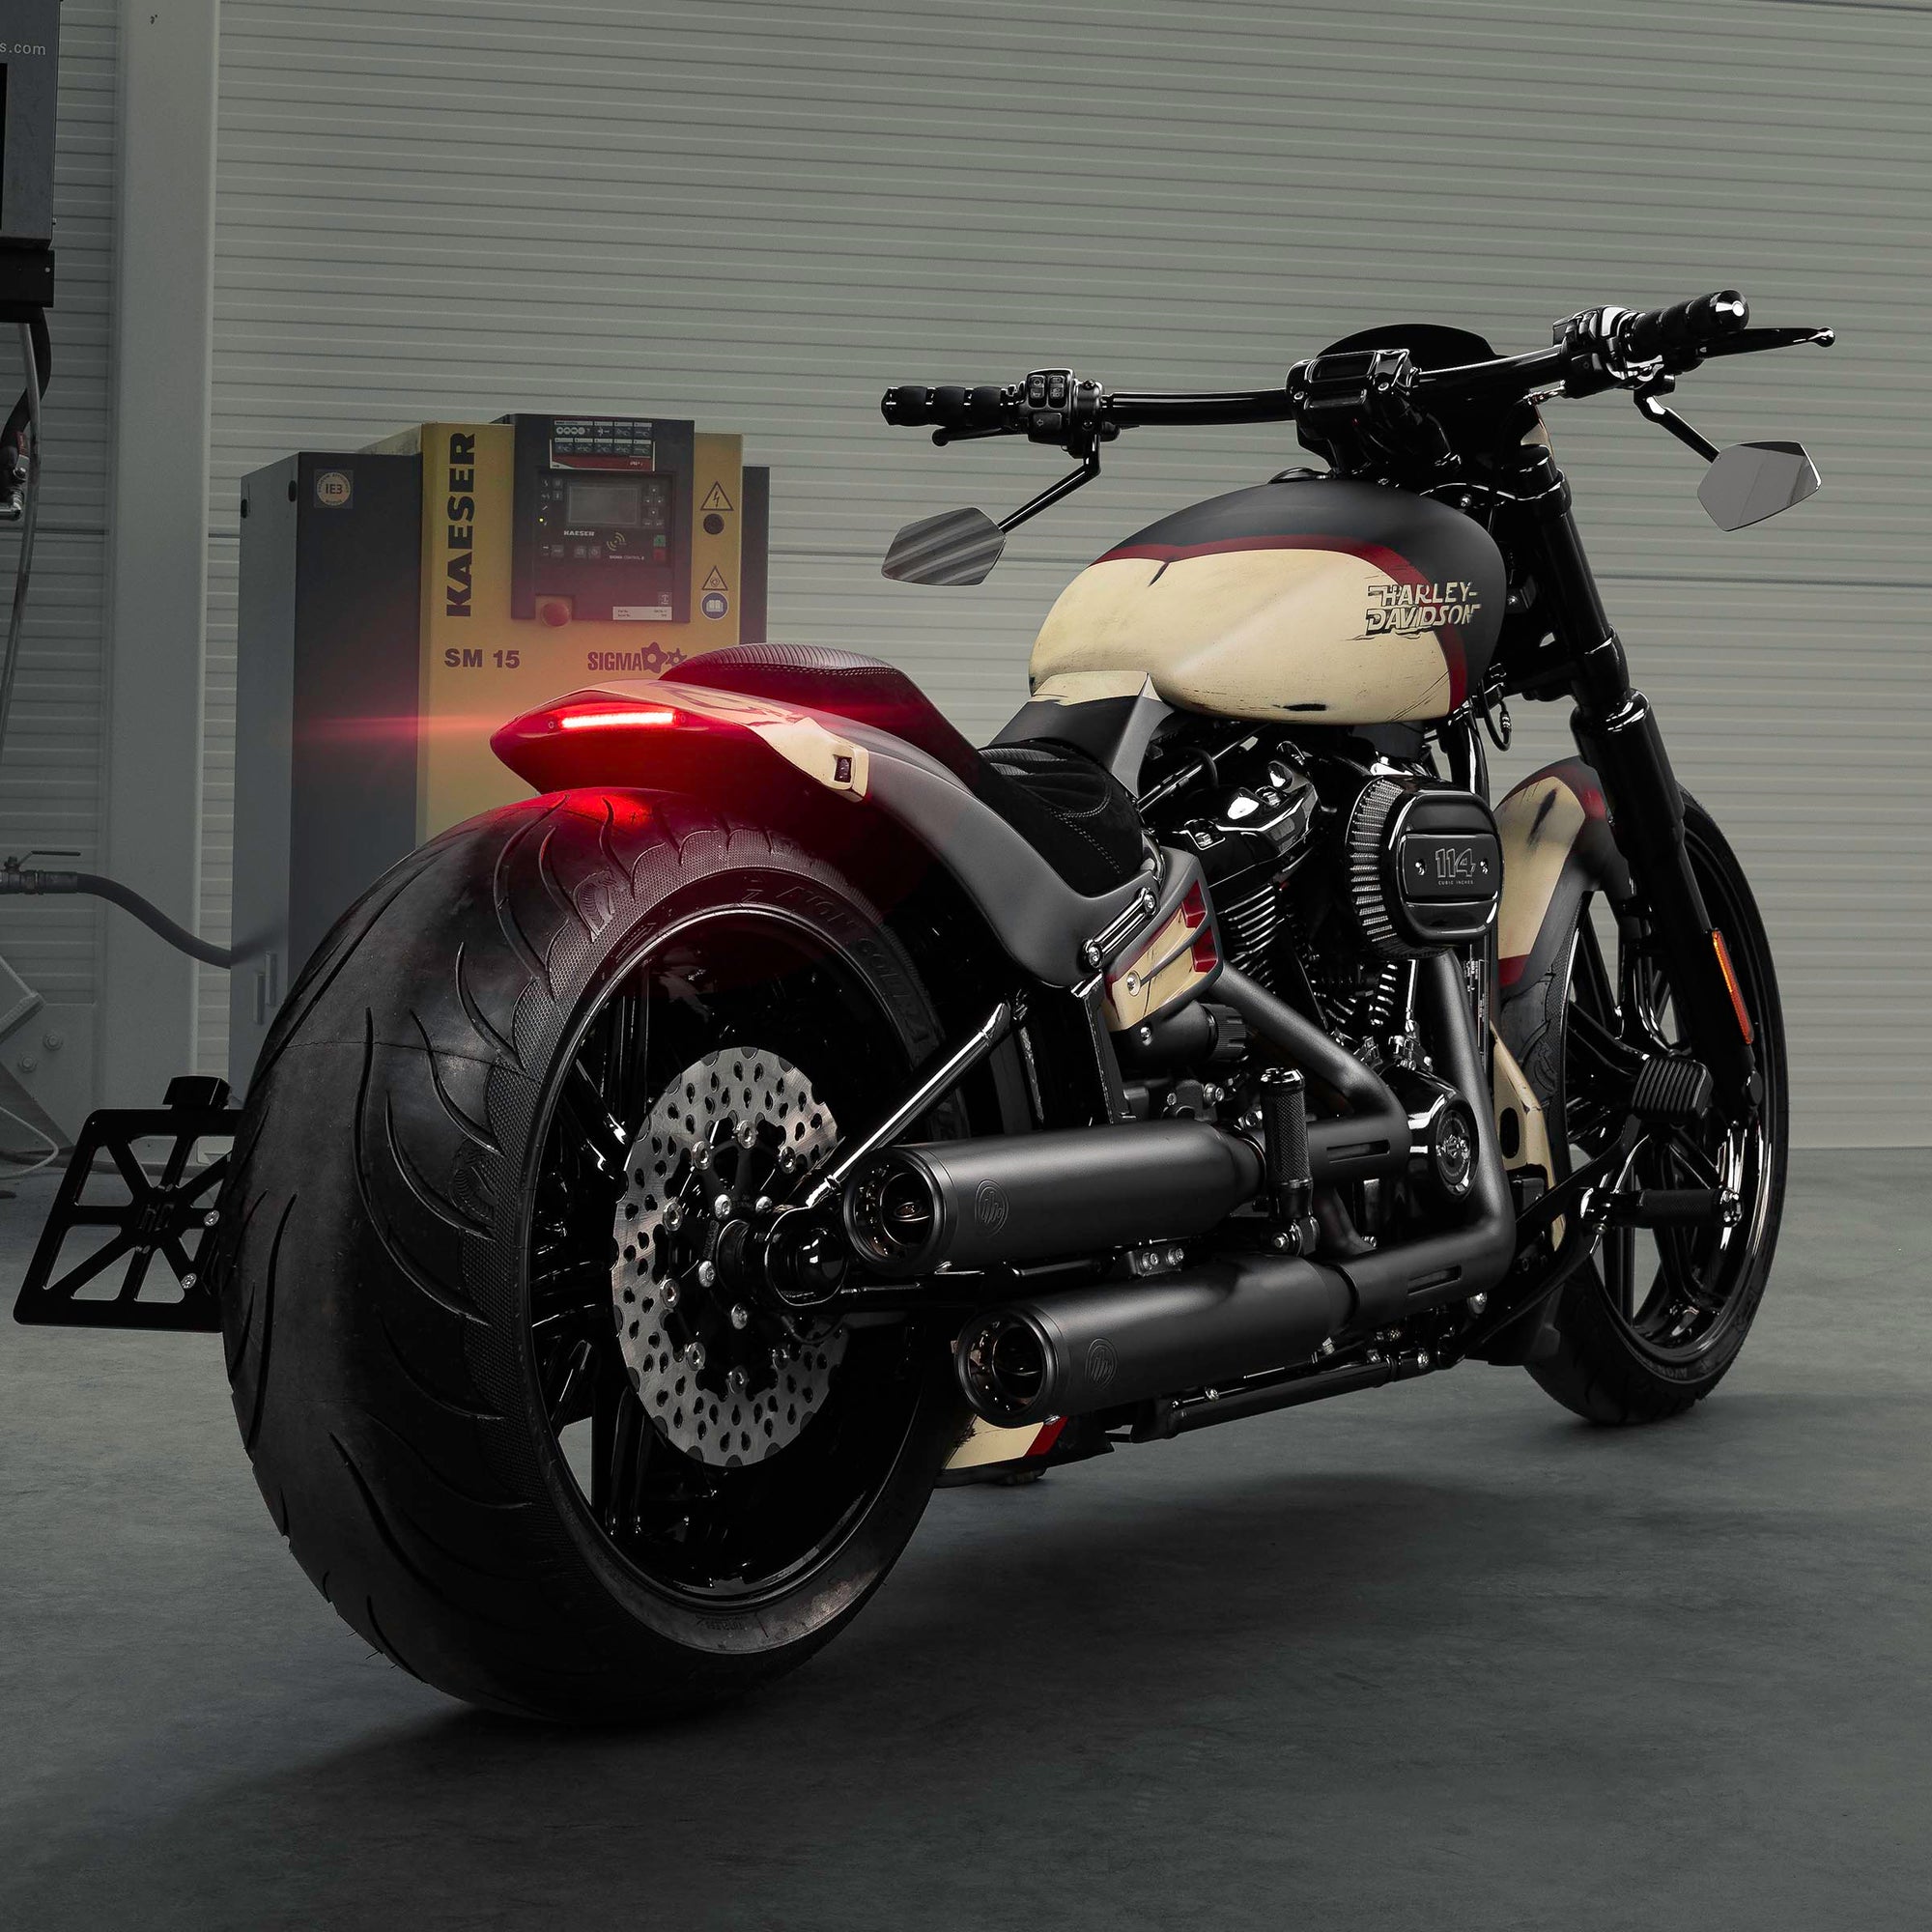 Harley Davidson motorcycle with Killer Custom parts from the rear in a modern bike shop